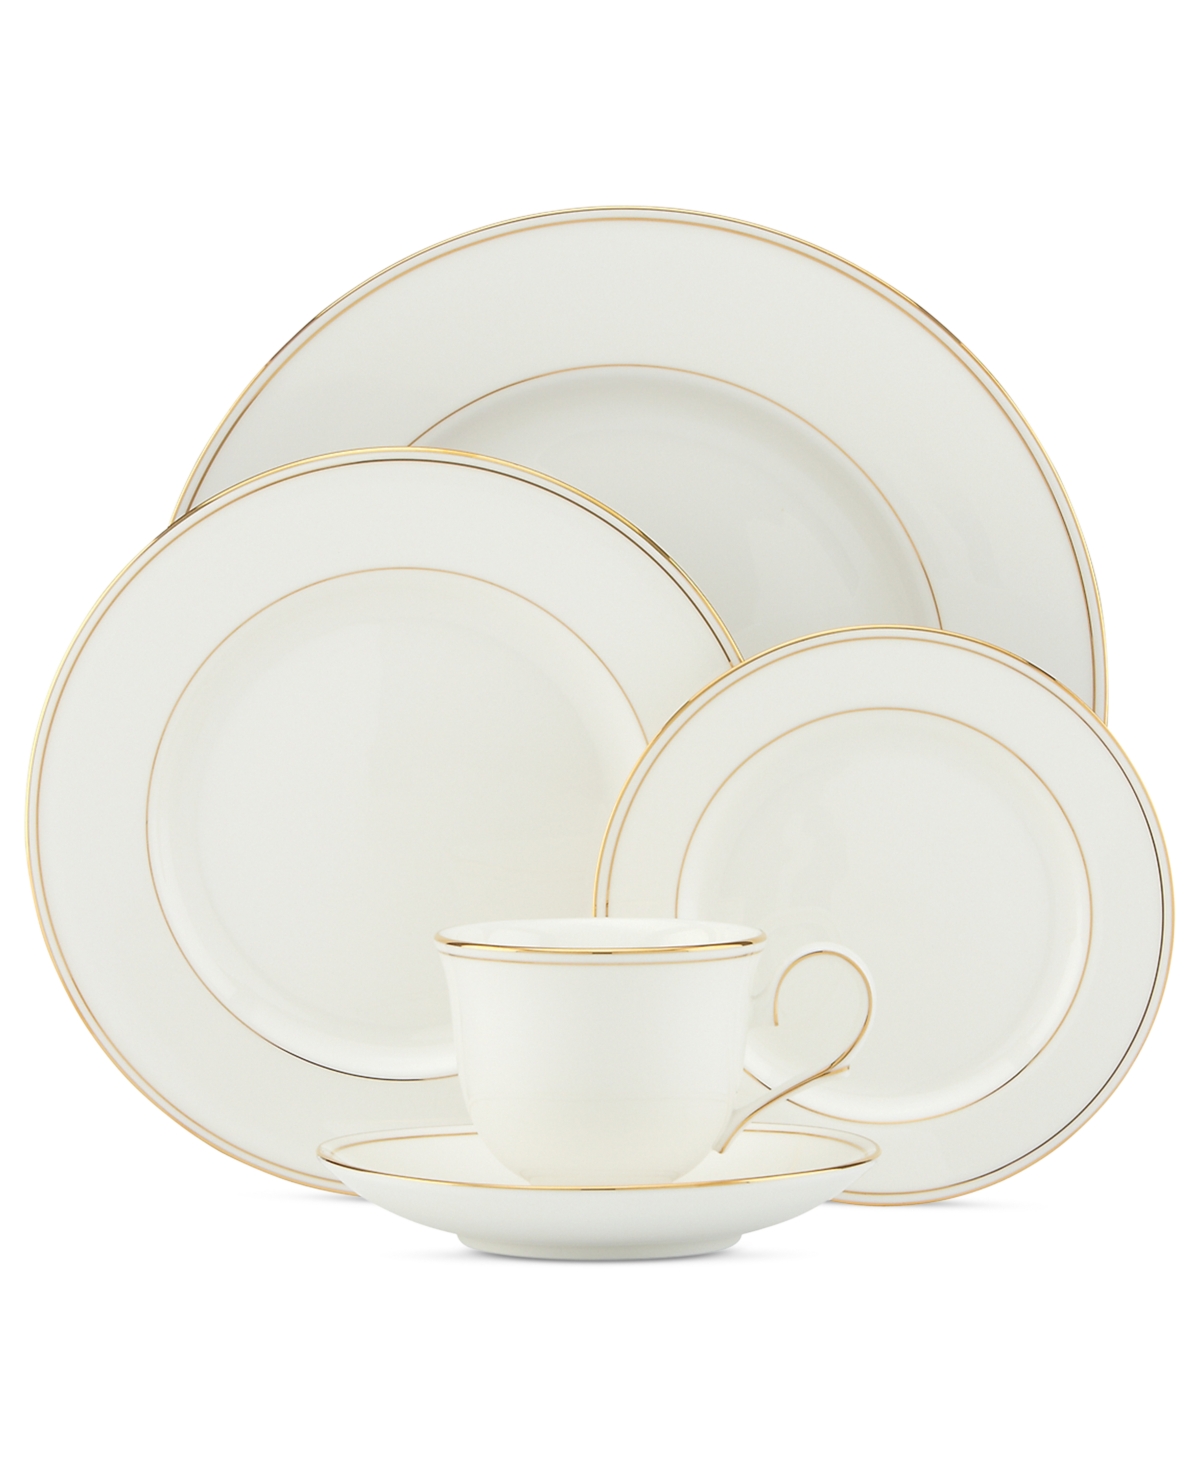 Lenox Federal Gold 5-piece Place Setting